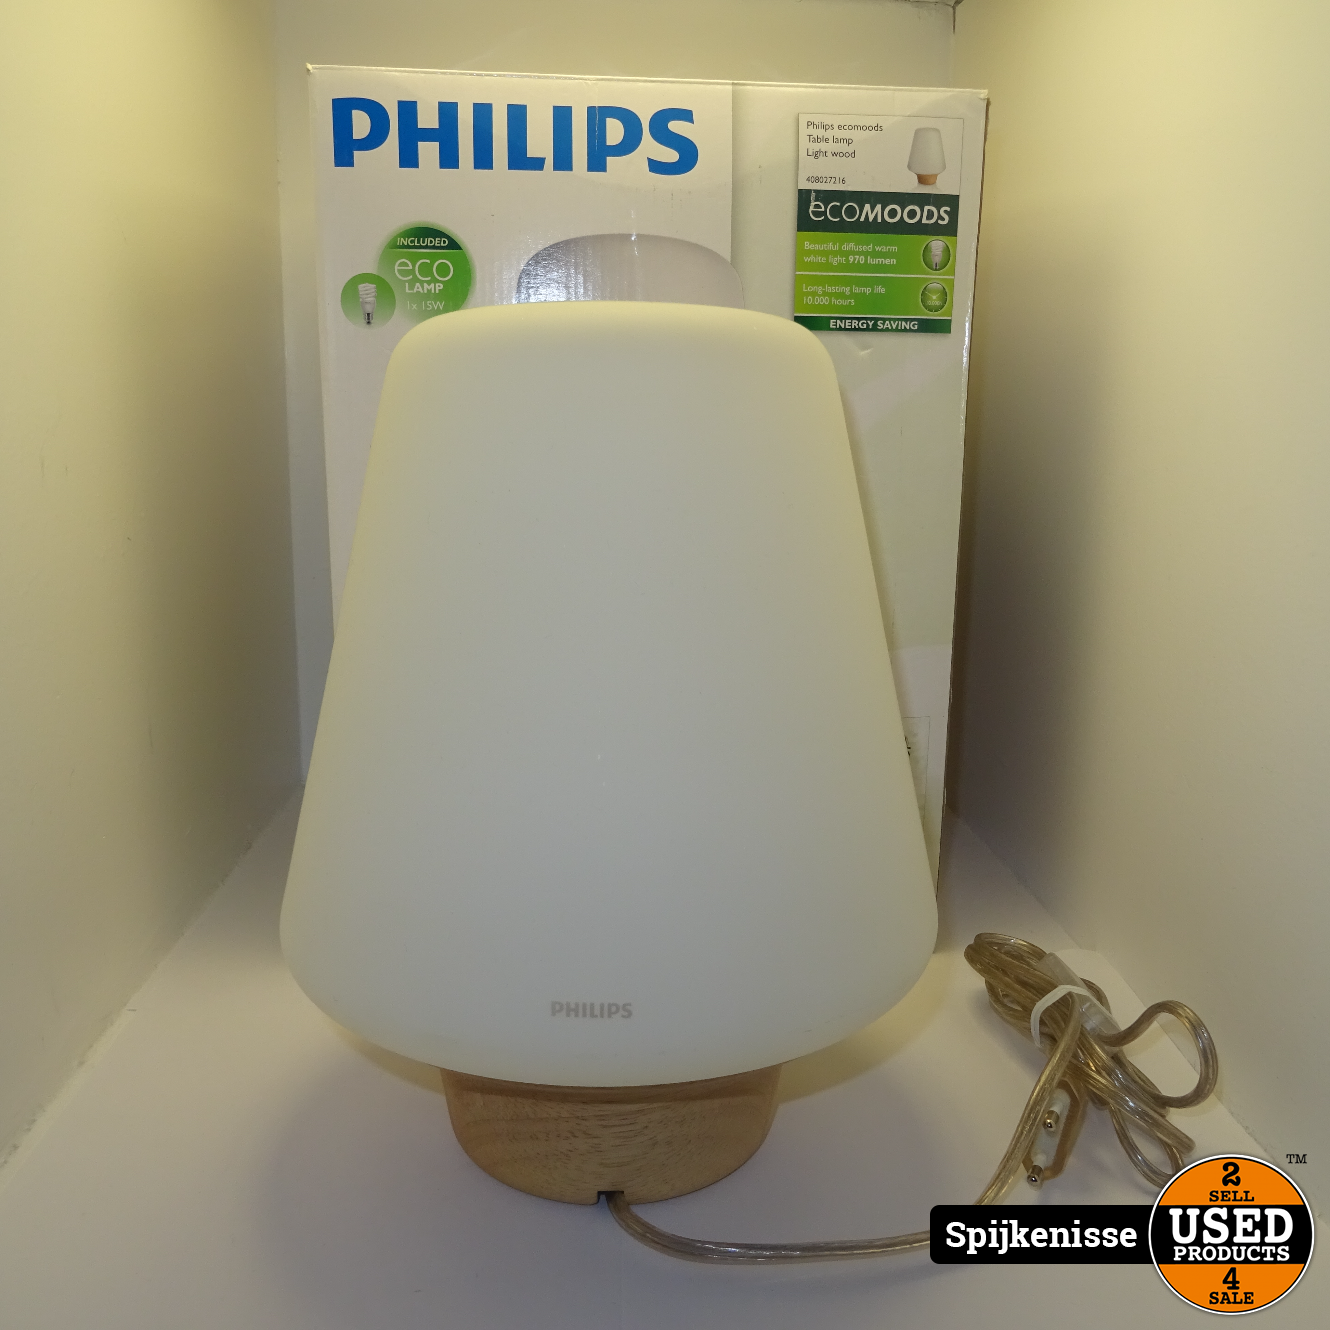 Philips Ecomoods Table Lamp Lightwood *806341* Used Products Spijkenisse